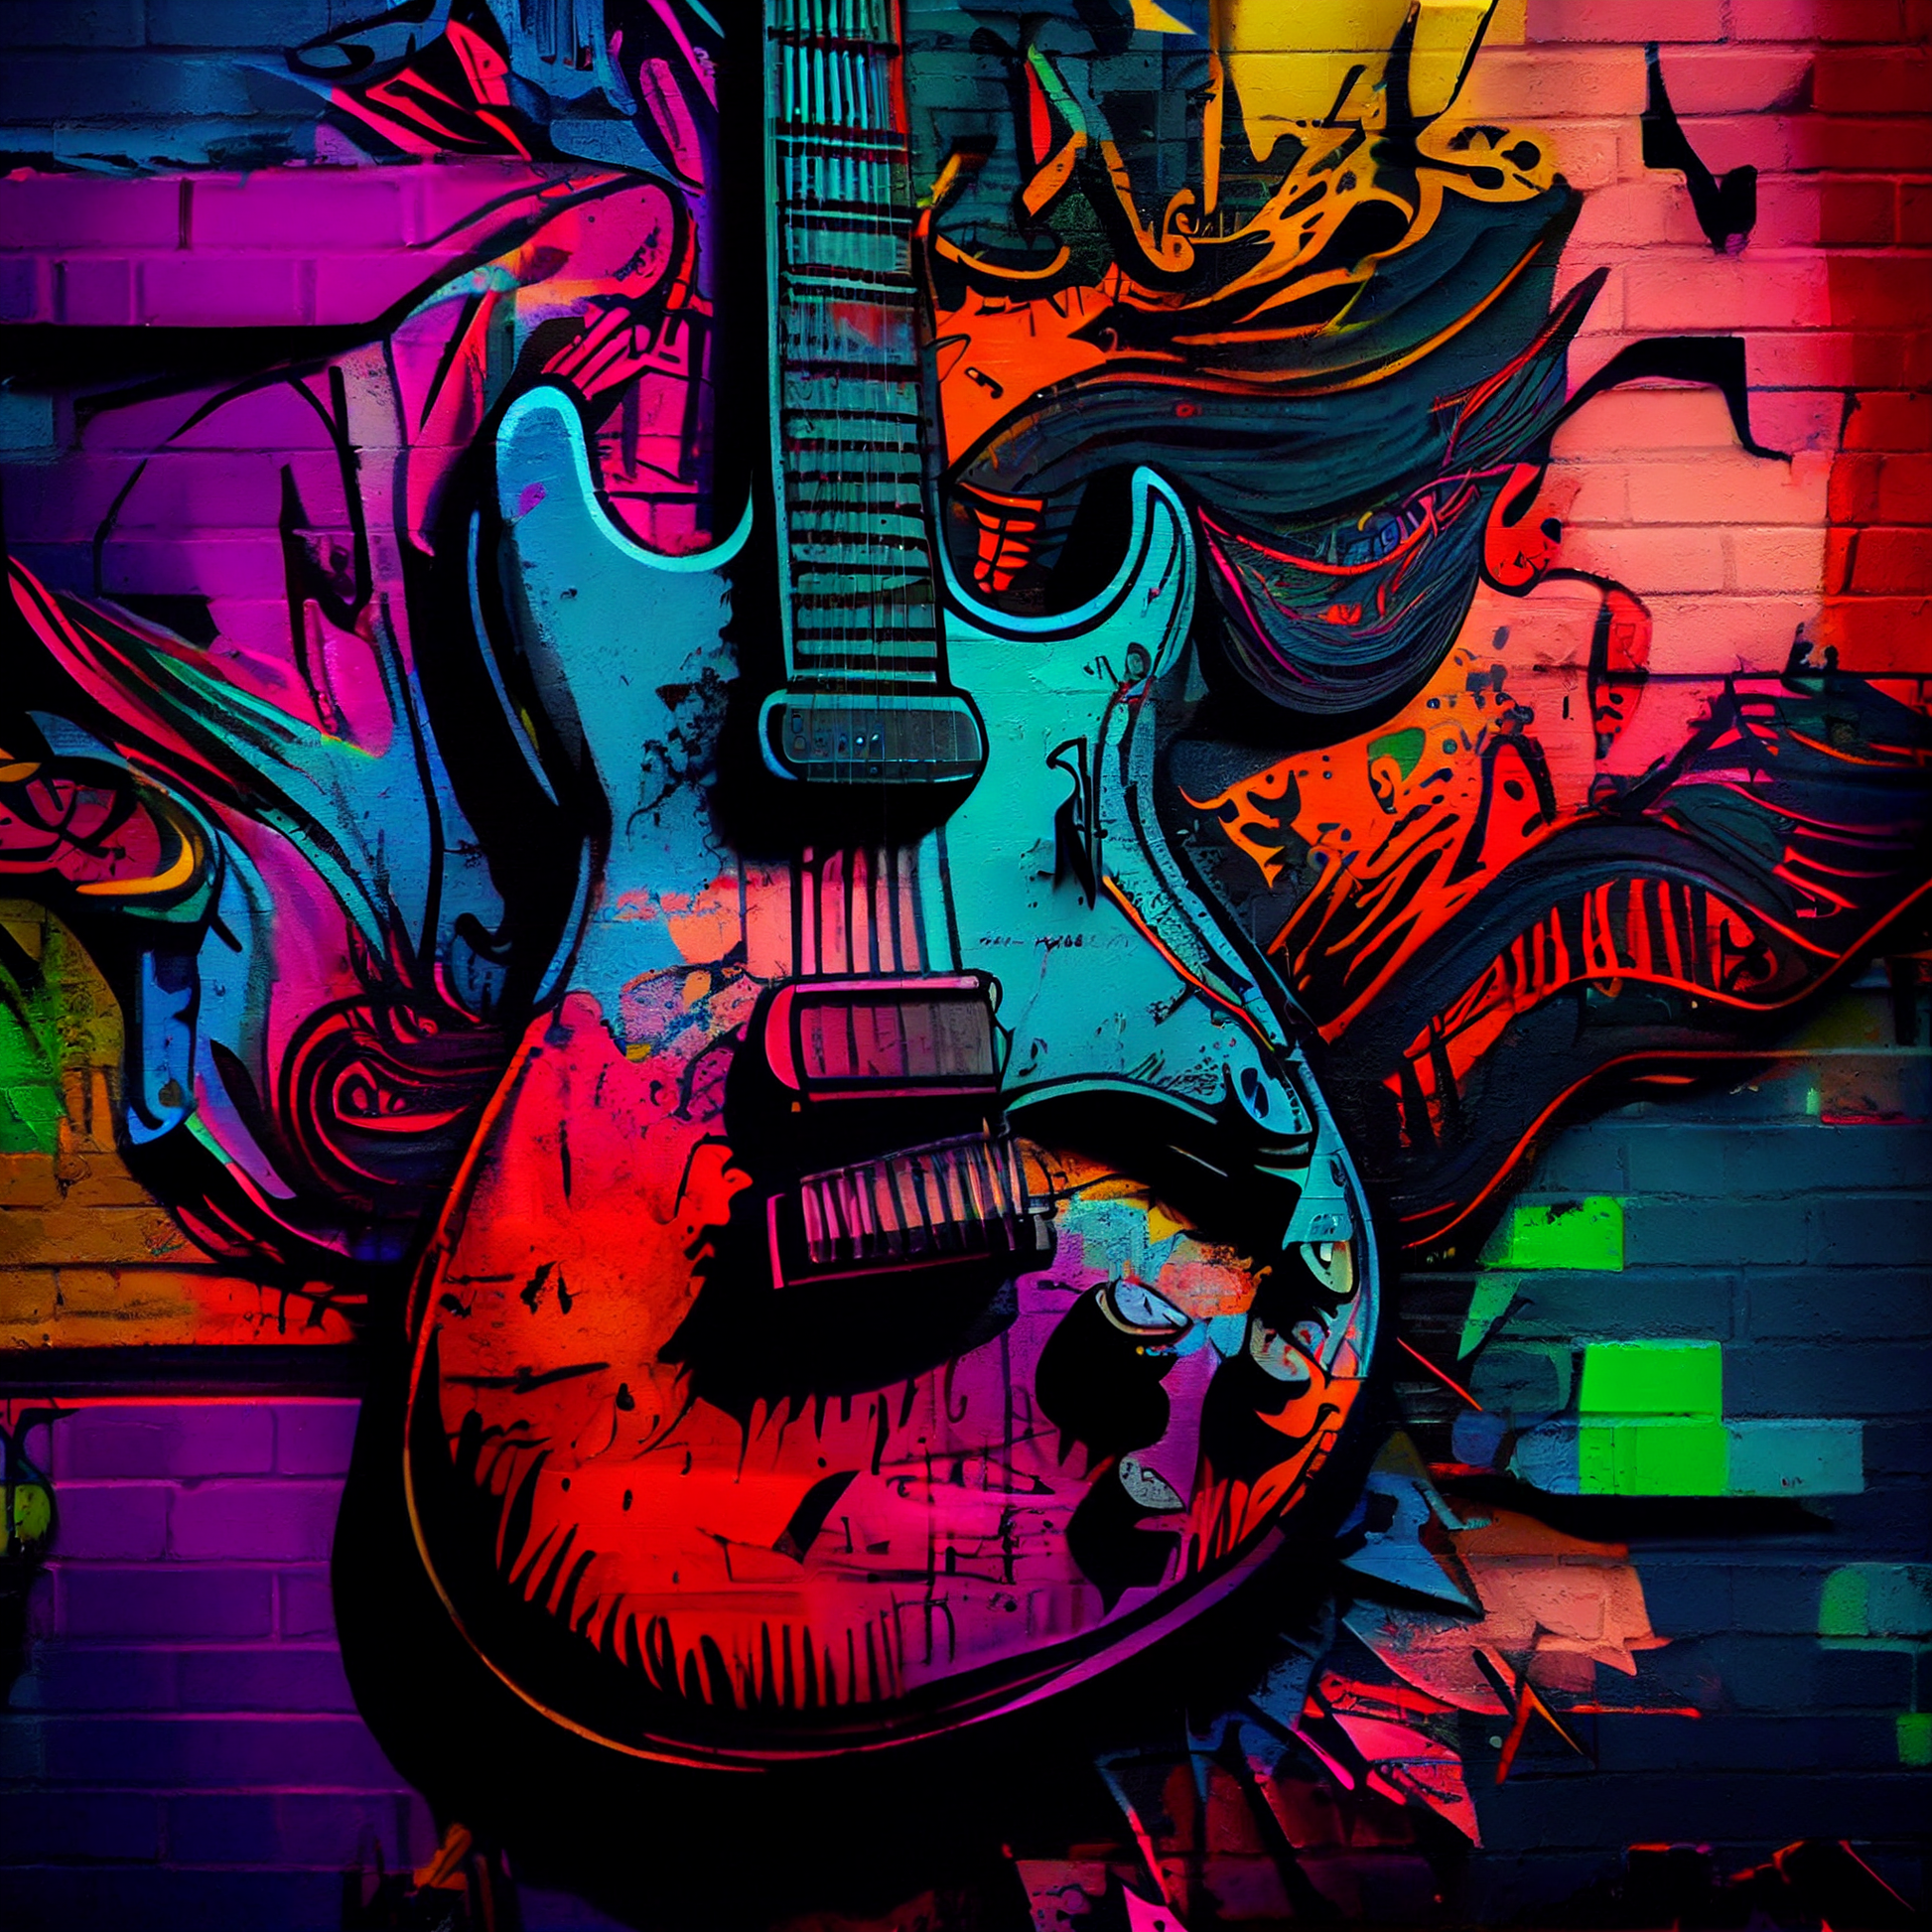 awesome guitar drawings